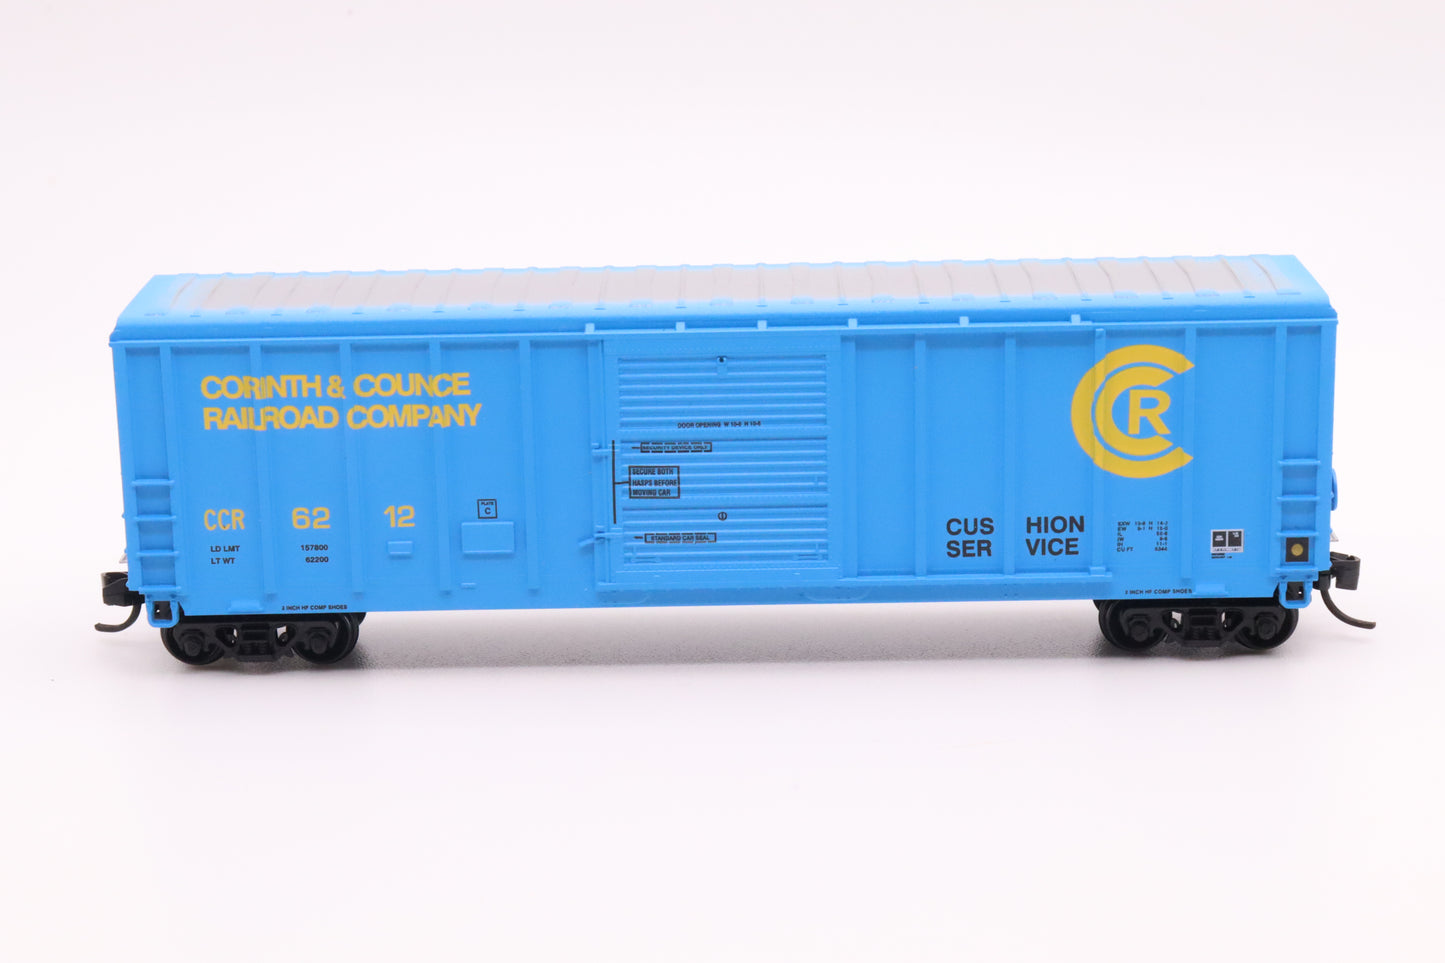 FVM-8115-01 - Corinth and Counce 50' PS 5344 cu.ft. Single Door Boxcar - Road #6212